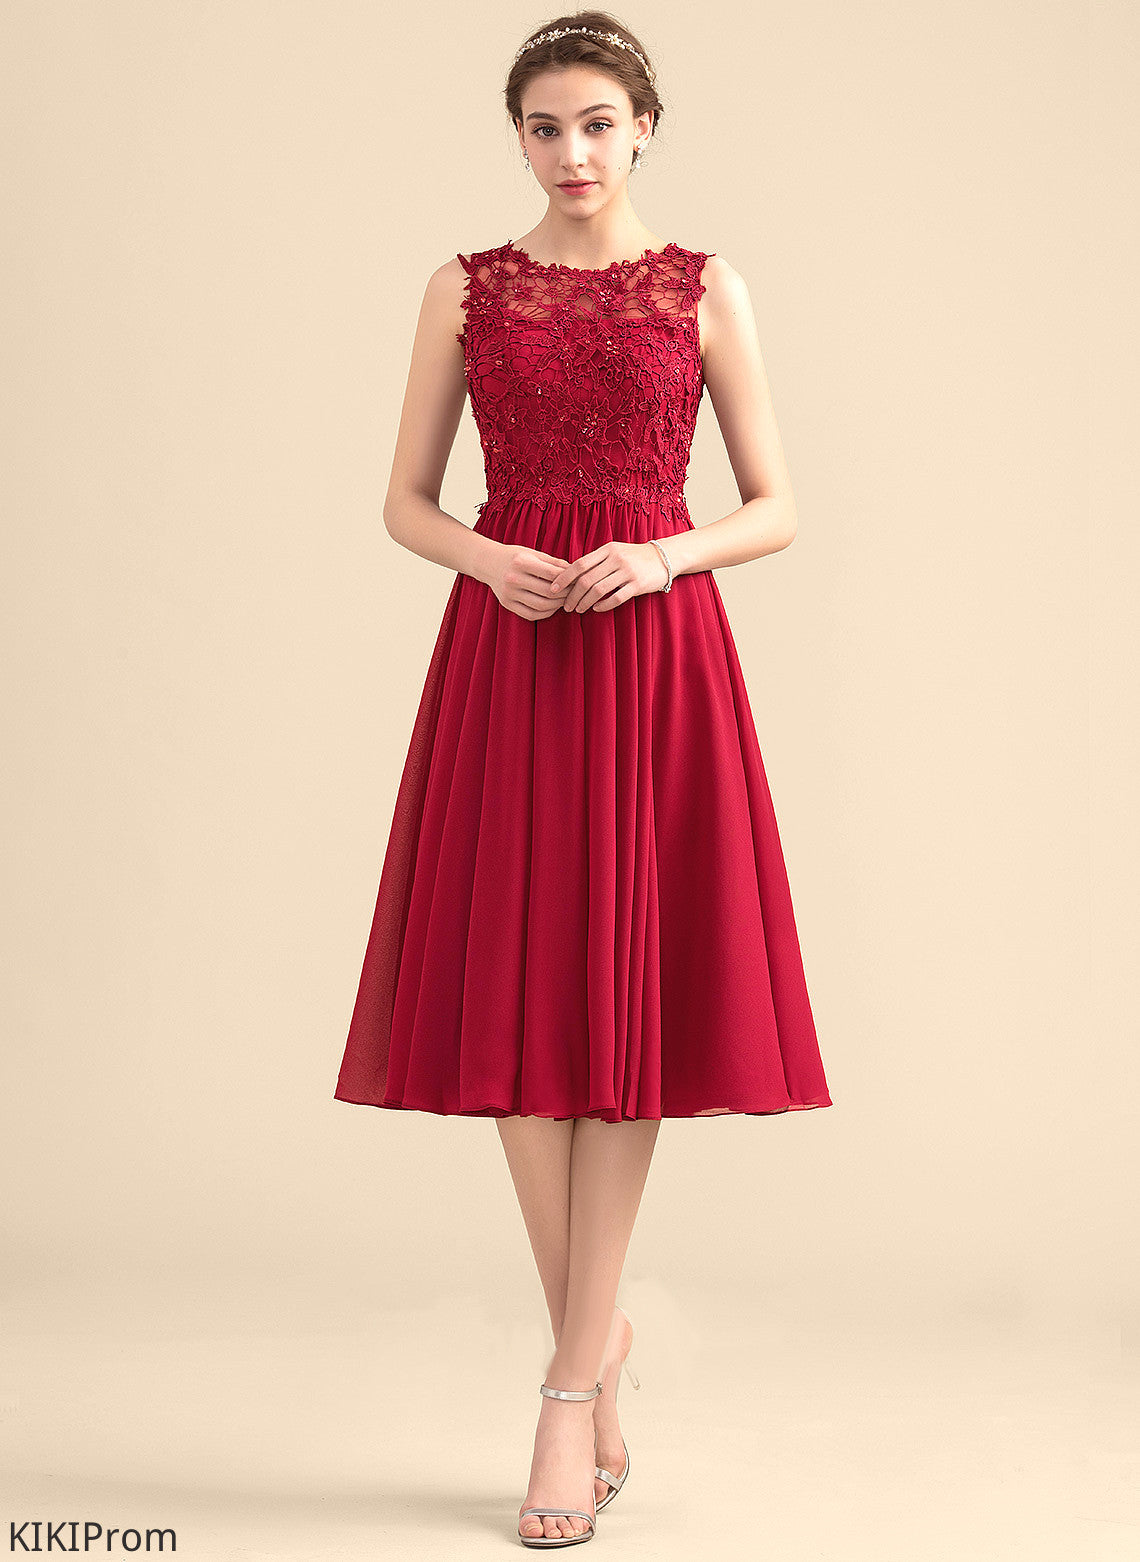 Beading Scoop A-Line Lace Lace Knee-Length Homecoming With Neck Homecoming Dresses Dress Chasity Chiffon